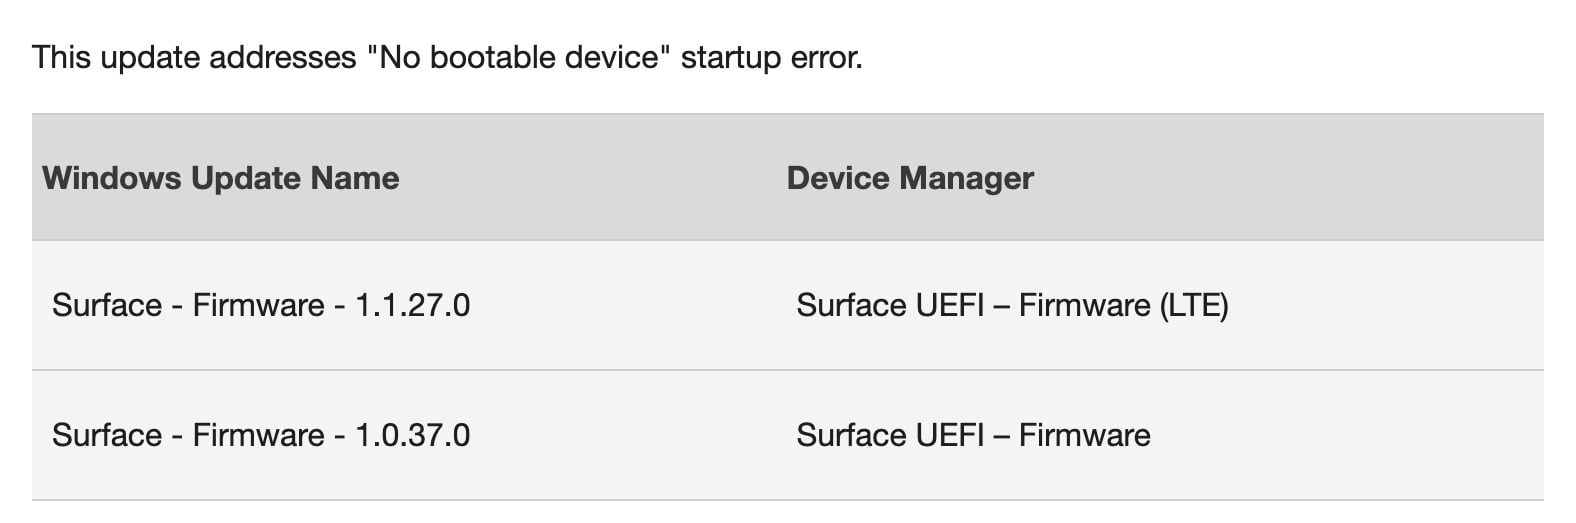 Microsoft Surface Go gets a fix for the “No bootable device” startup error